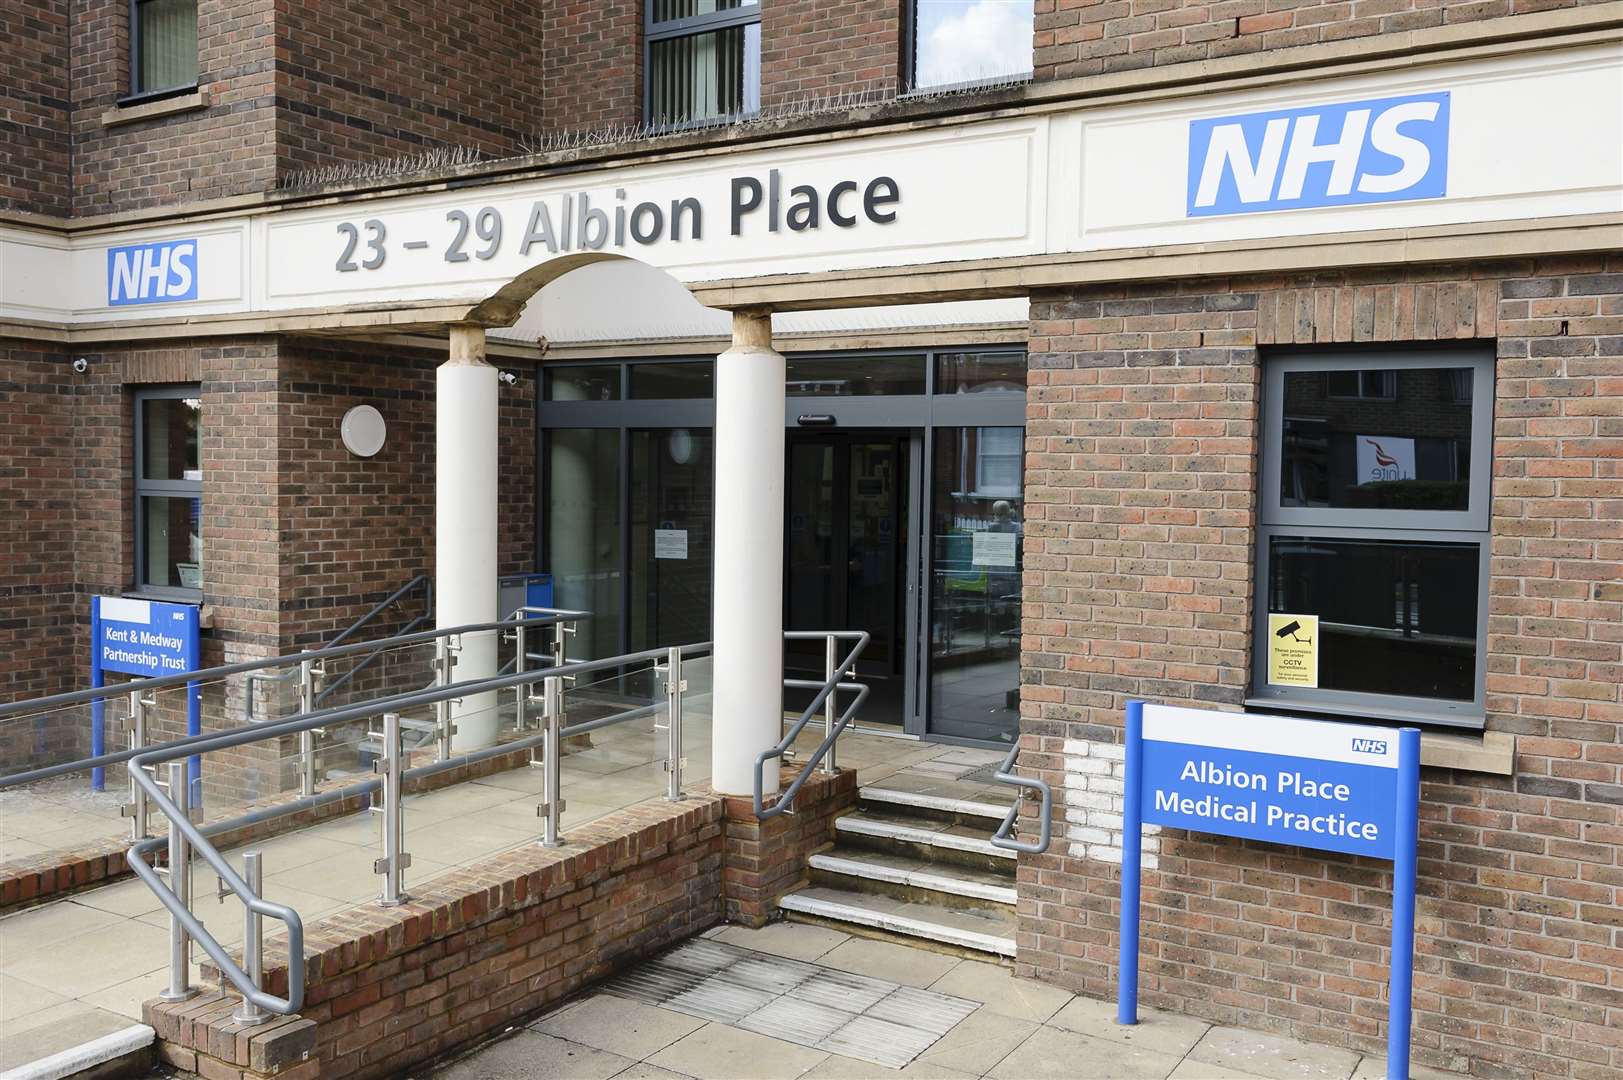 Albion Place Medical Practice has been closed by a water leak